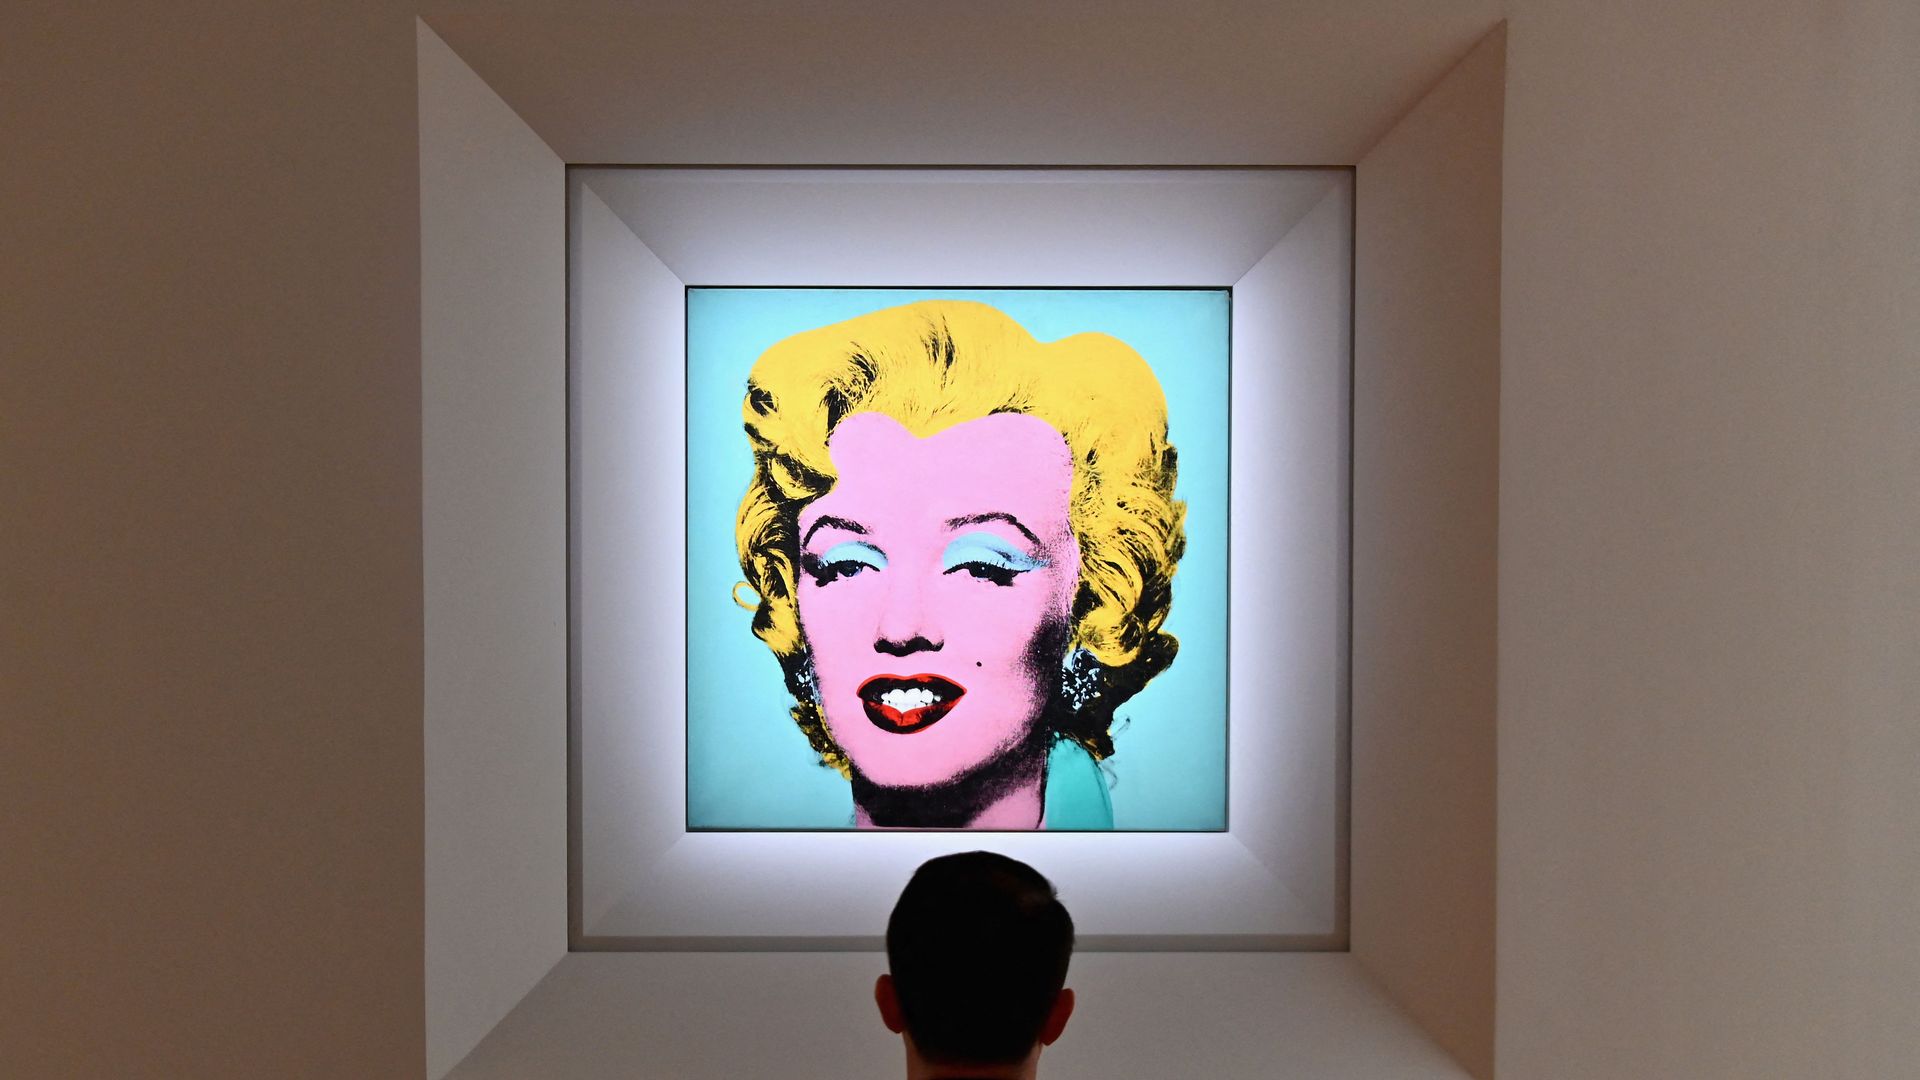 The Warhol on show at Christie's